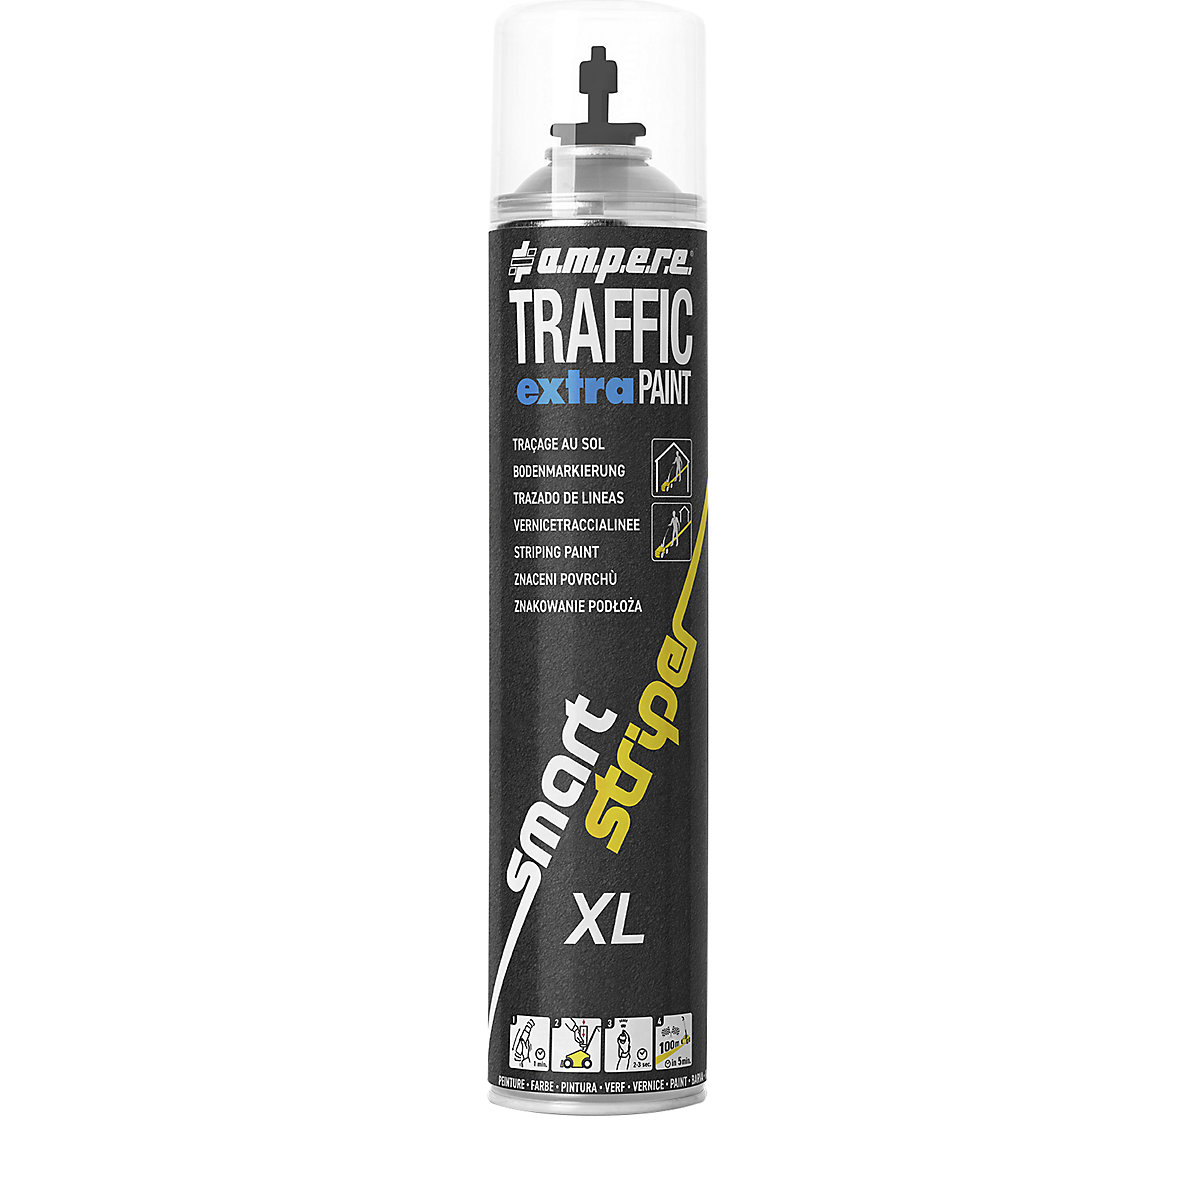 Traffic extra Paint® XL marking paint – Ampere, contents 750 ml, pack of 6, black-3